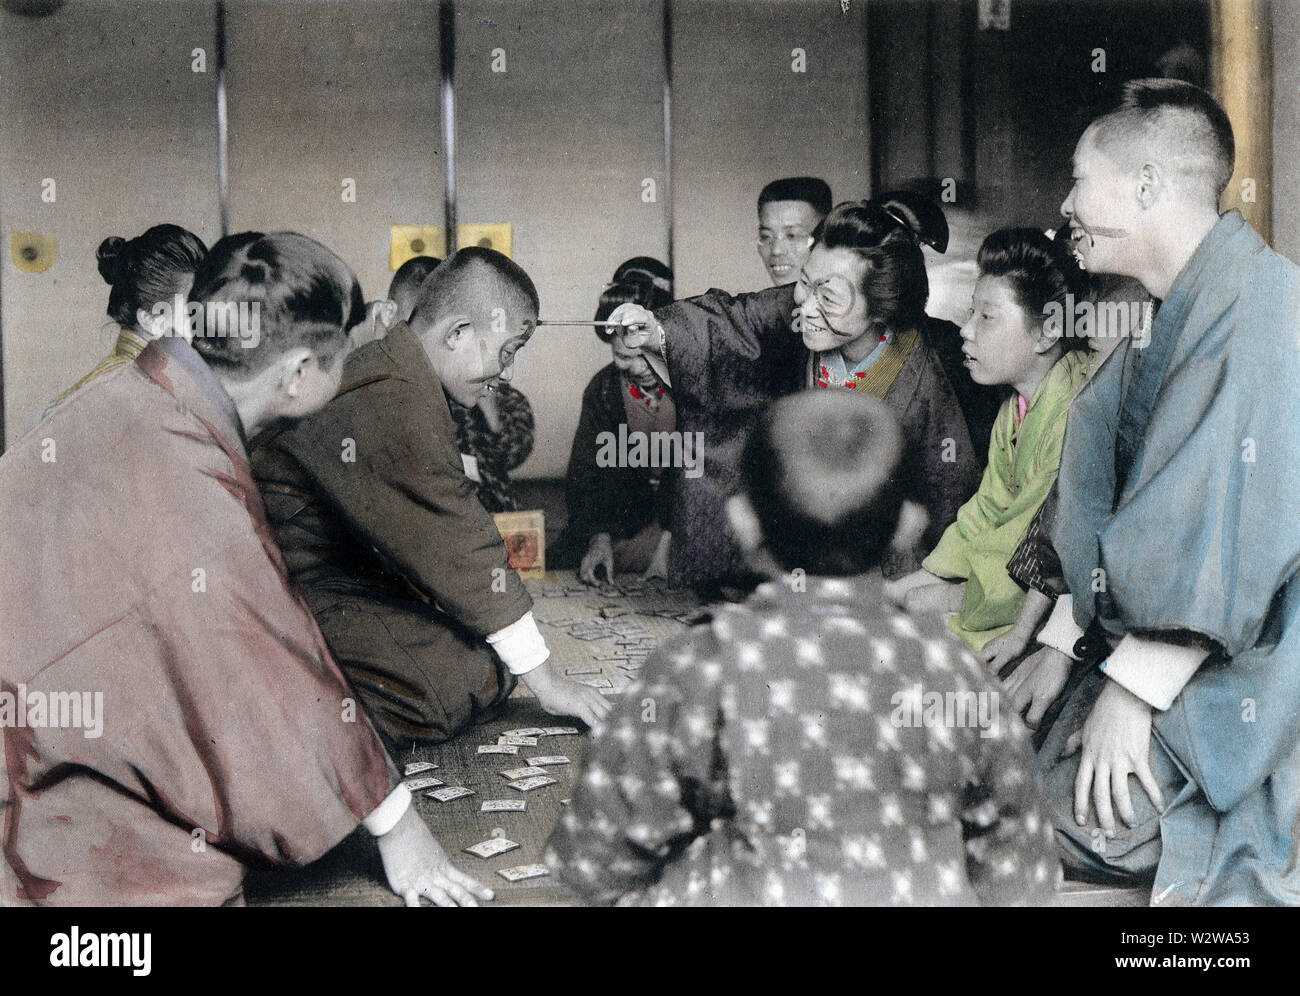 [ 1900s Japan - Japanese New Year - Playing Karuta ] —   Losers in the card game of karuta (see New Year Celebrations 18) get ink painted on their face.   This image is part of The New Year in Japan, a book published by Kobe-based photographer Kozaburo Tamamura in 1906 (Meiji 39).  20th century vintage collotype print. Stock Photo